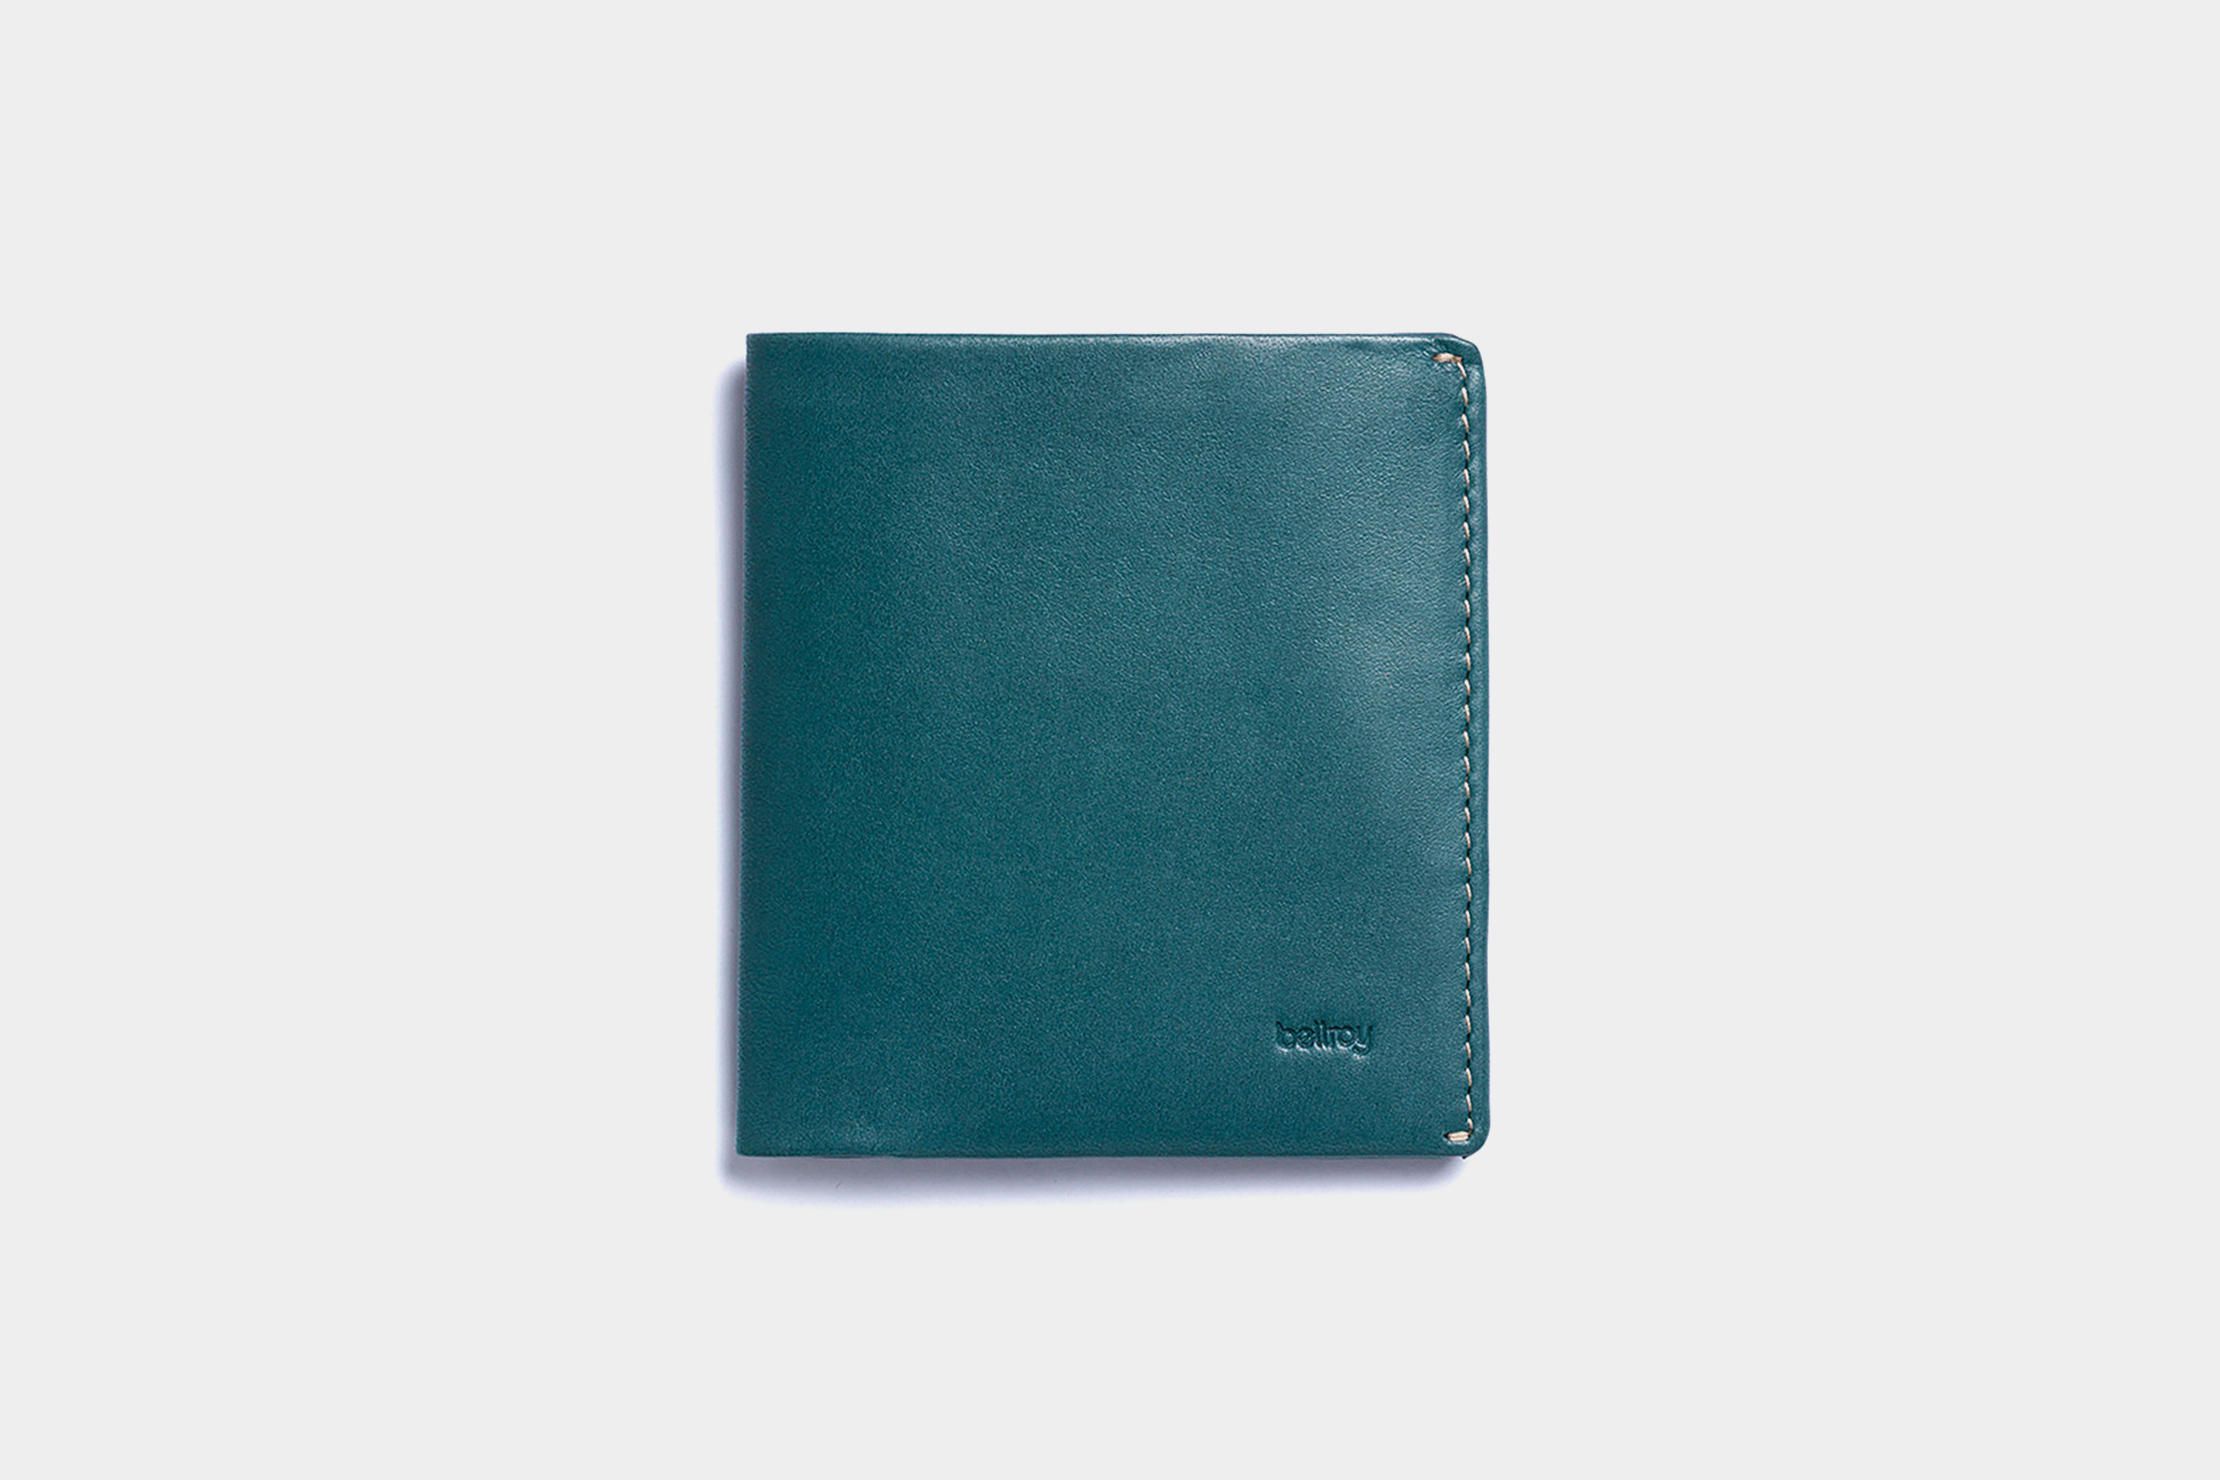 Bellroy Note Sleeve Wallet Review | Hacker